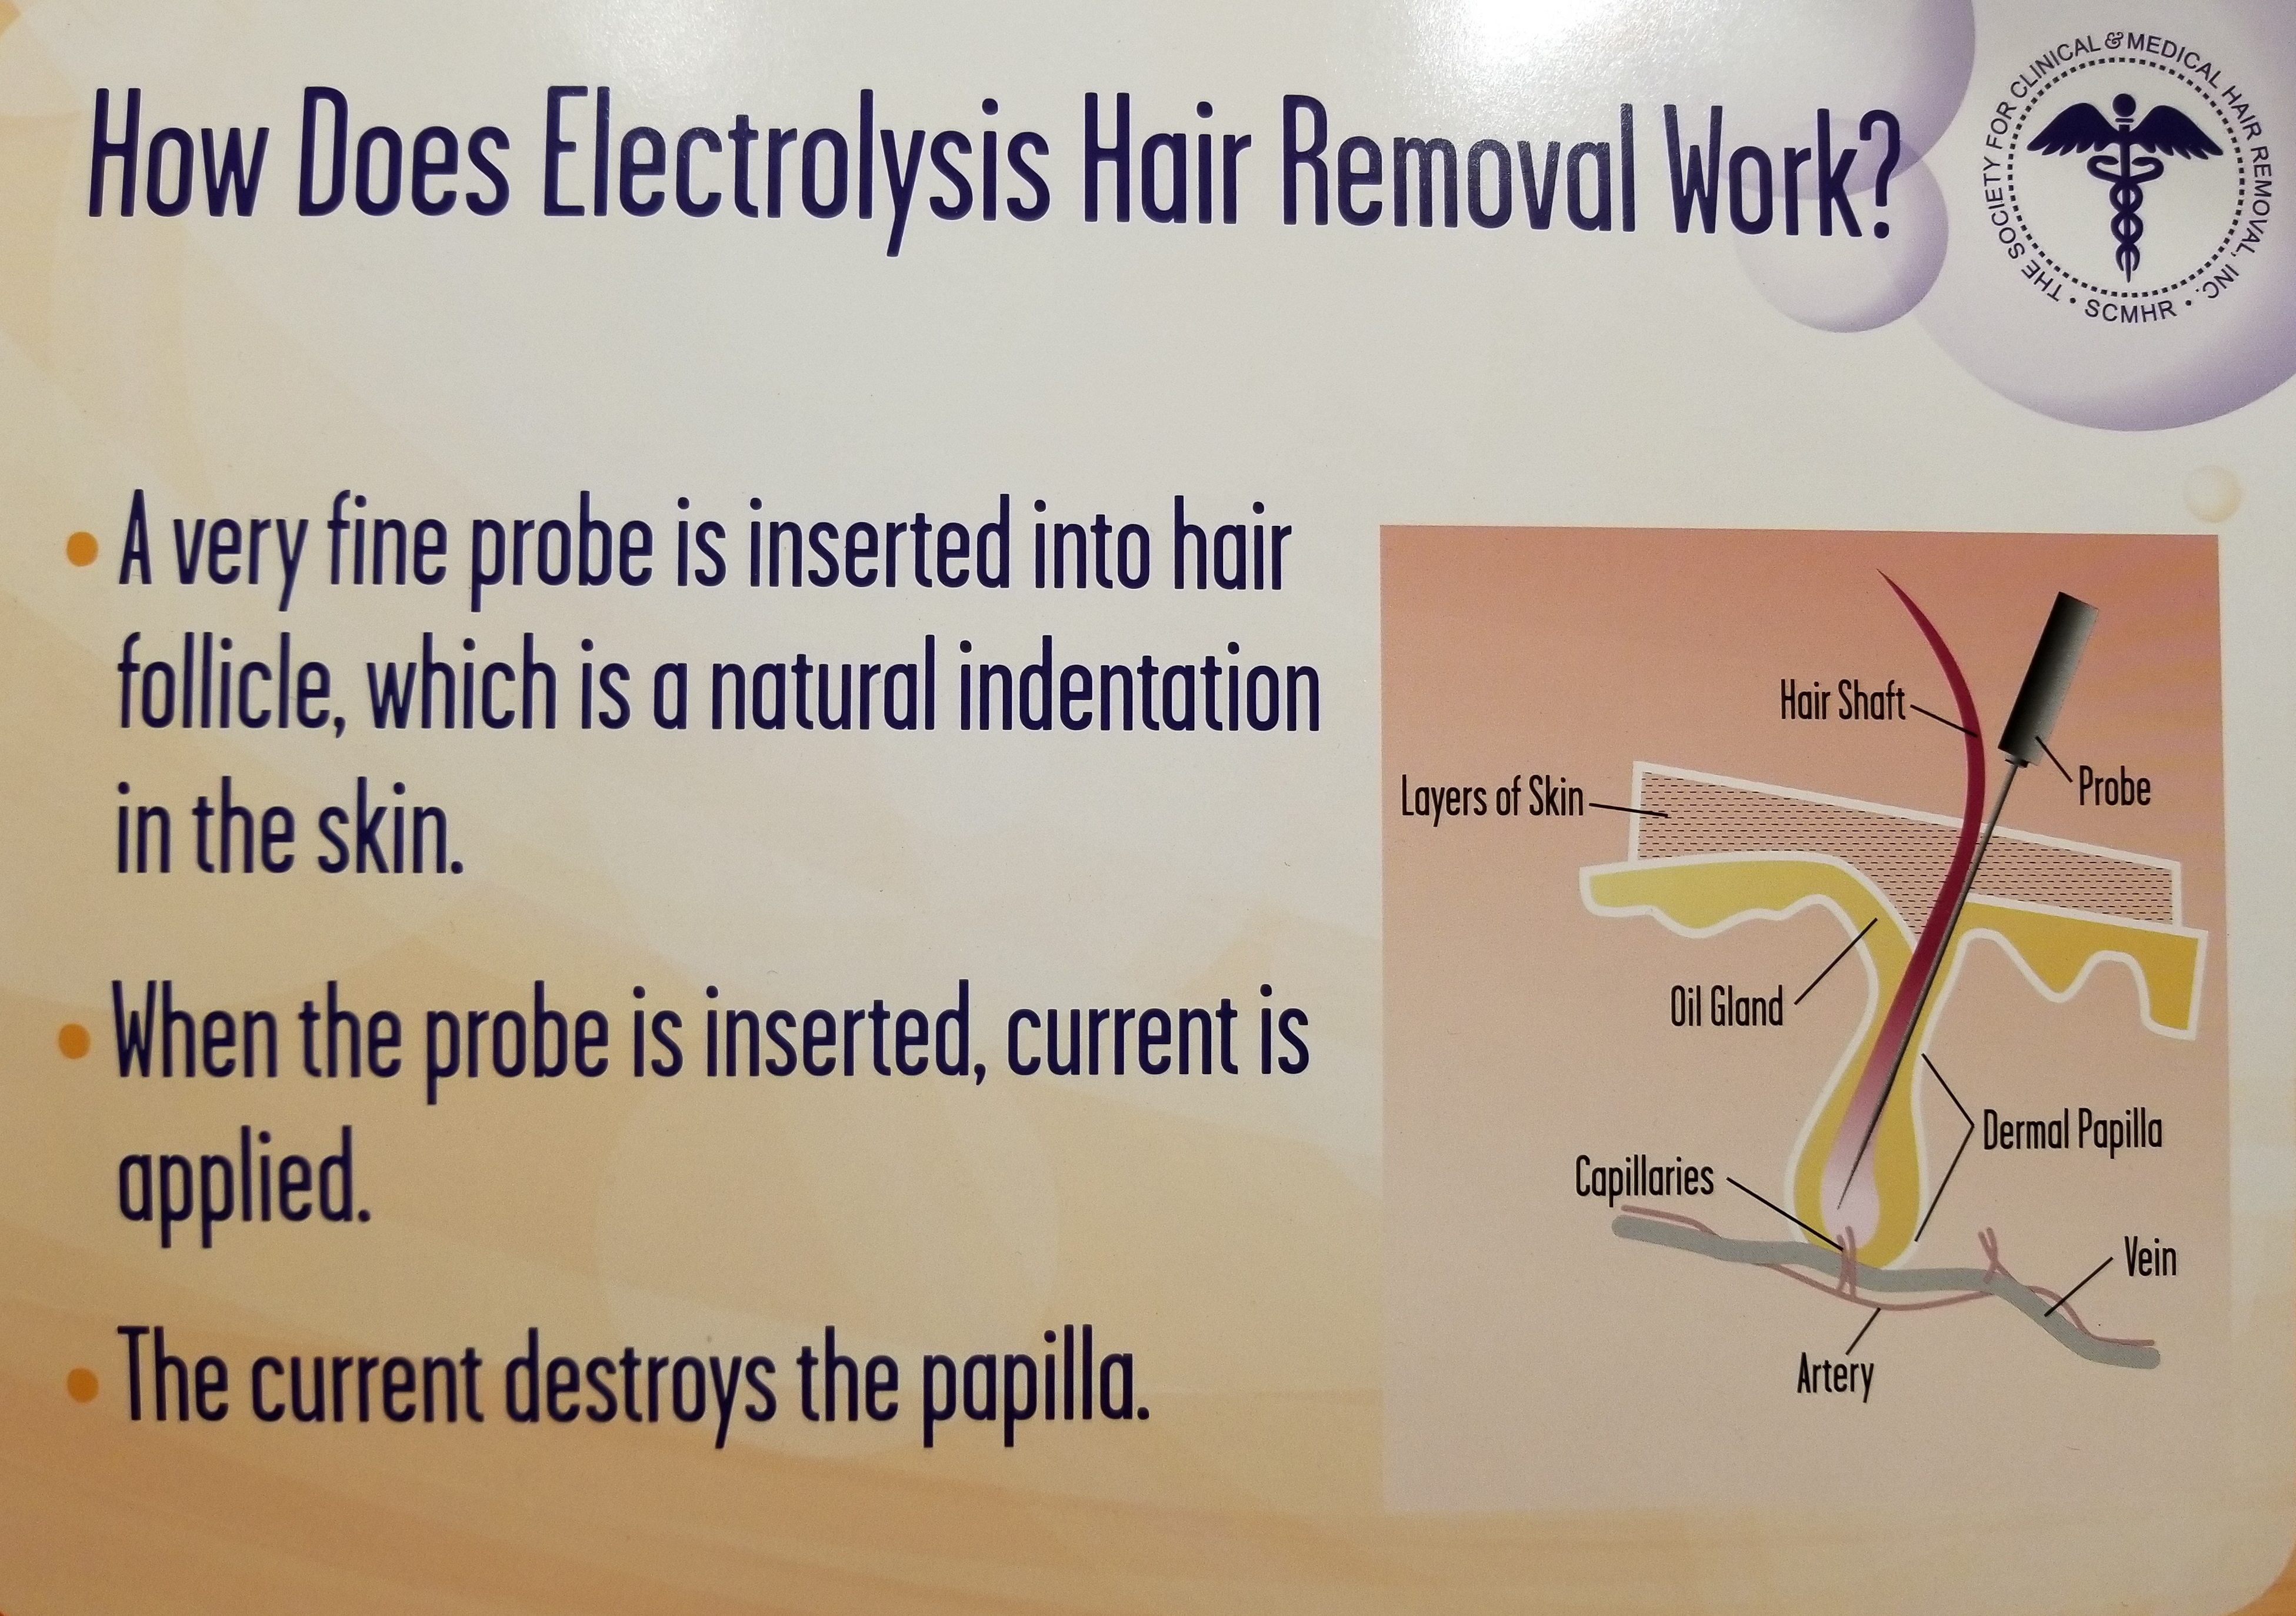 How Does Electrolysis Work?